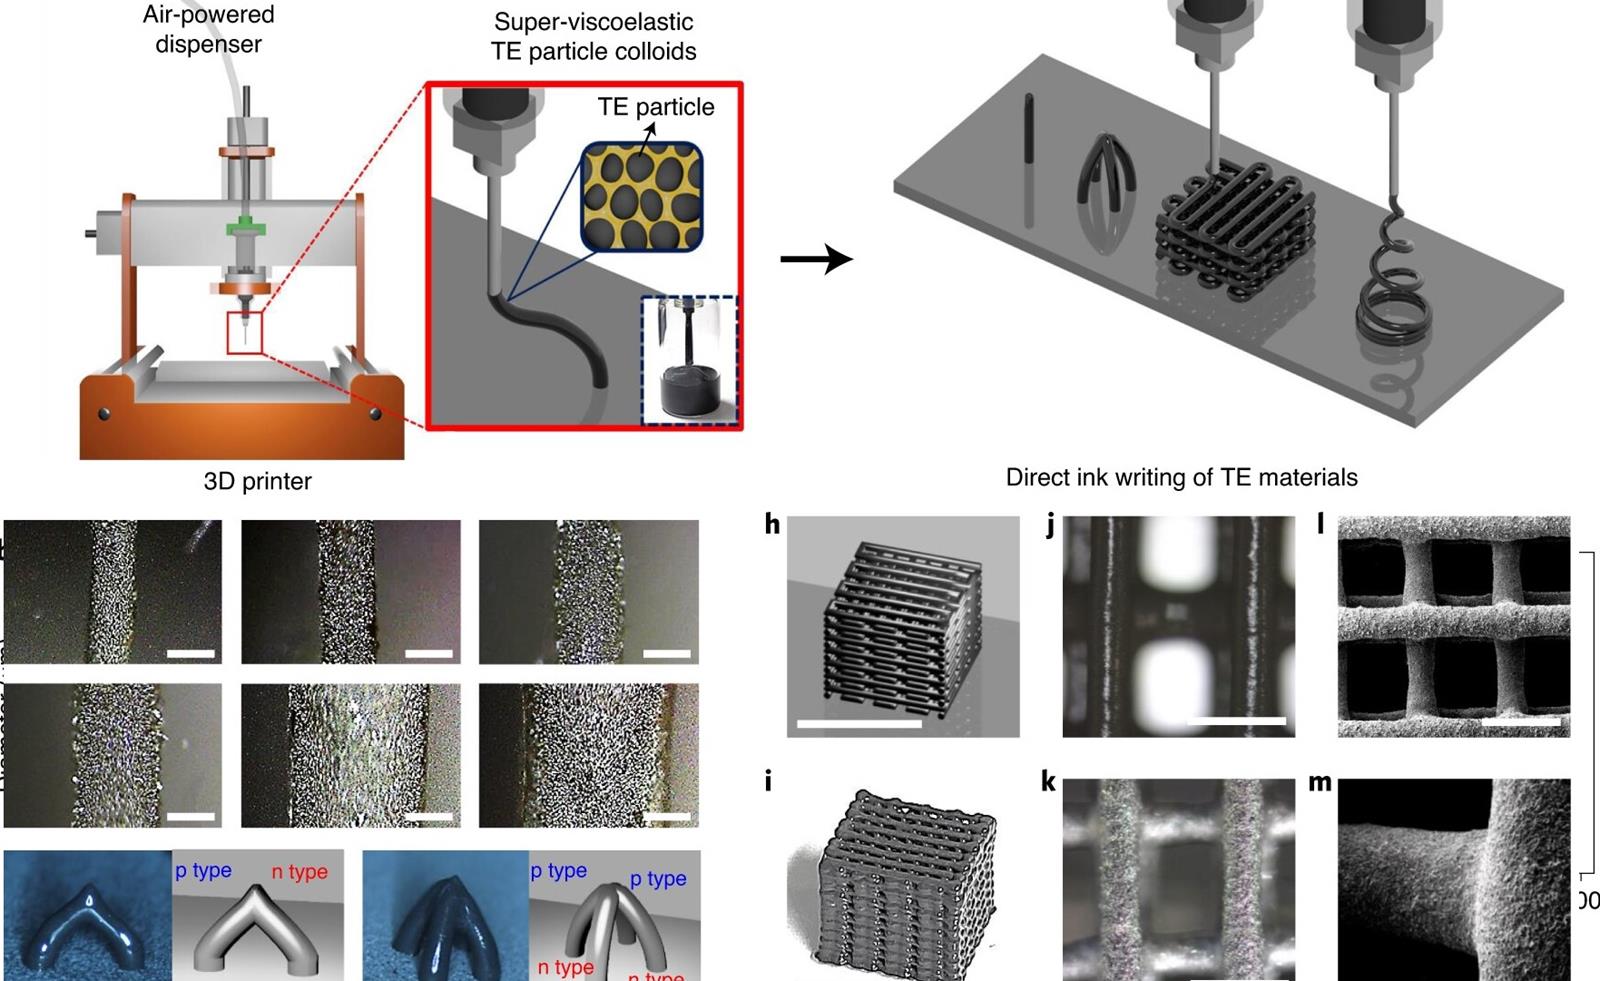 Small thermoelectric generators from a 3D printer within the range of the new filament